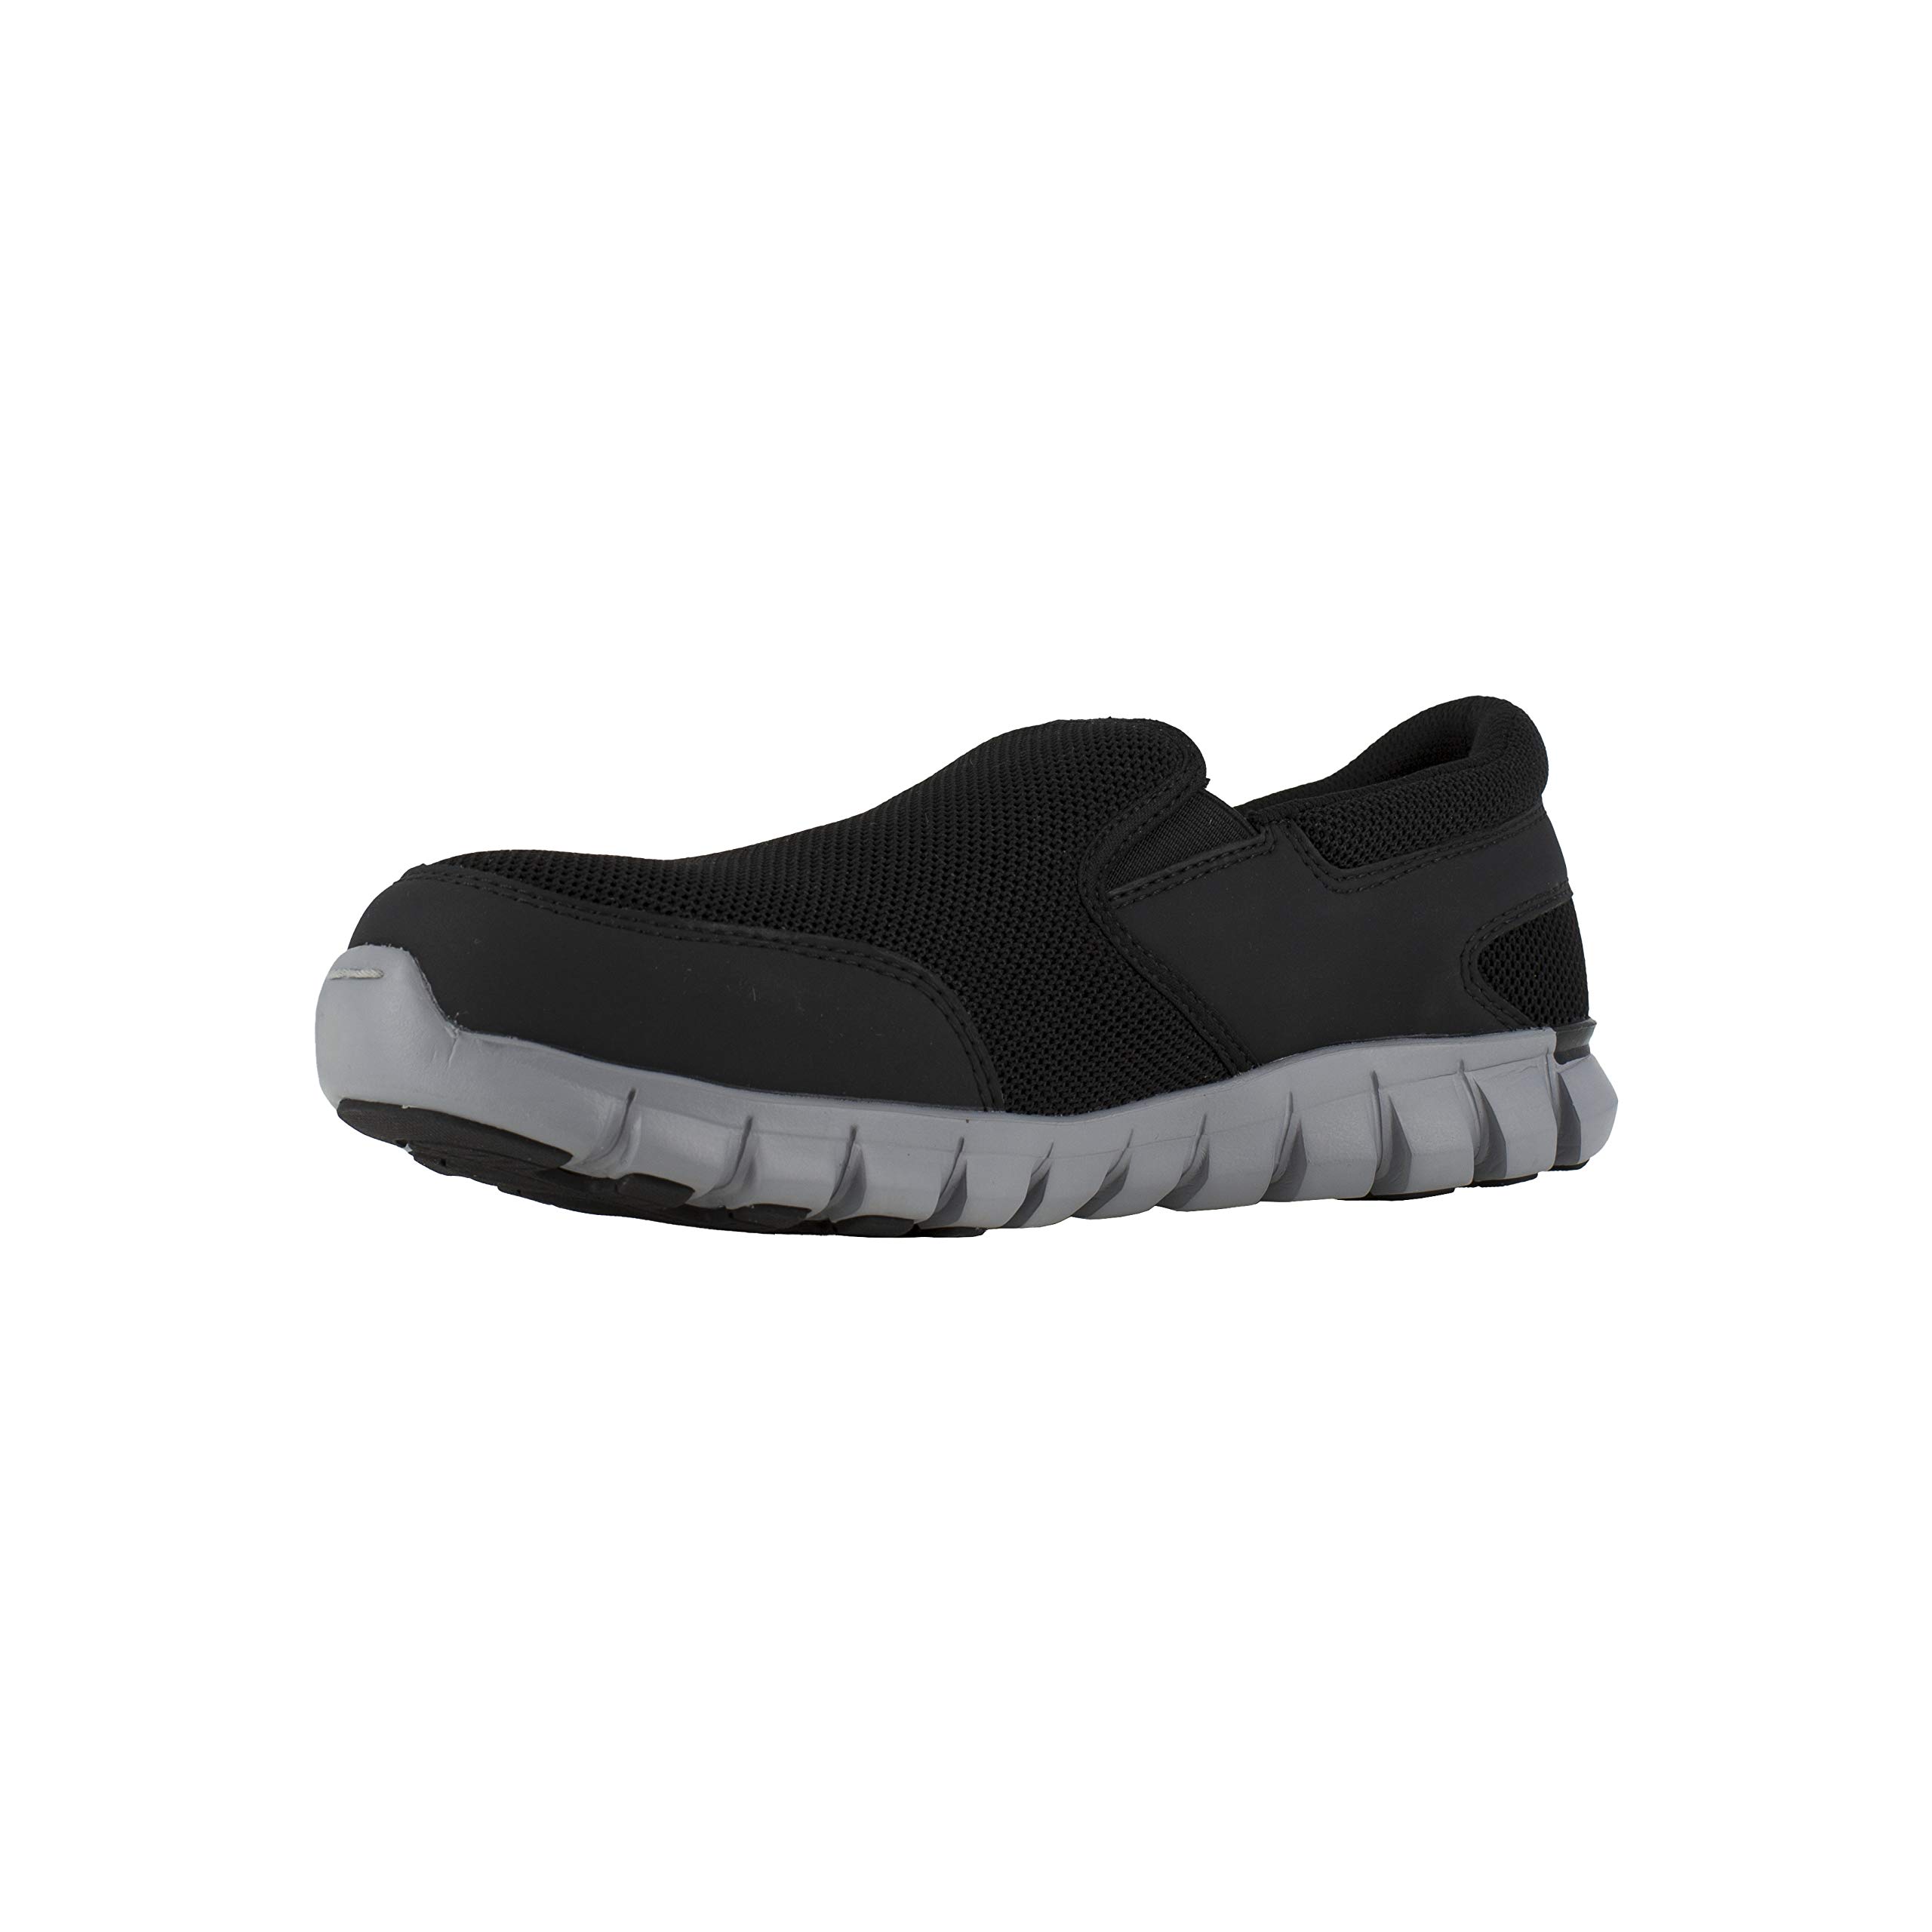 Reebok mens Sublite Cushion Work Safety Toe Athletic Slip-on Industrial Construction Shoe, Black, 10.5 Wide US